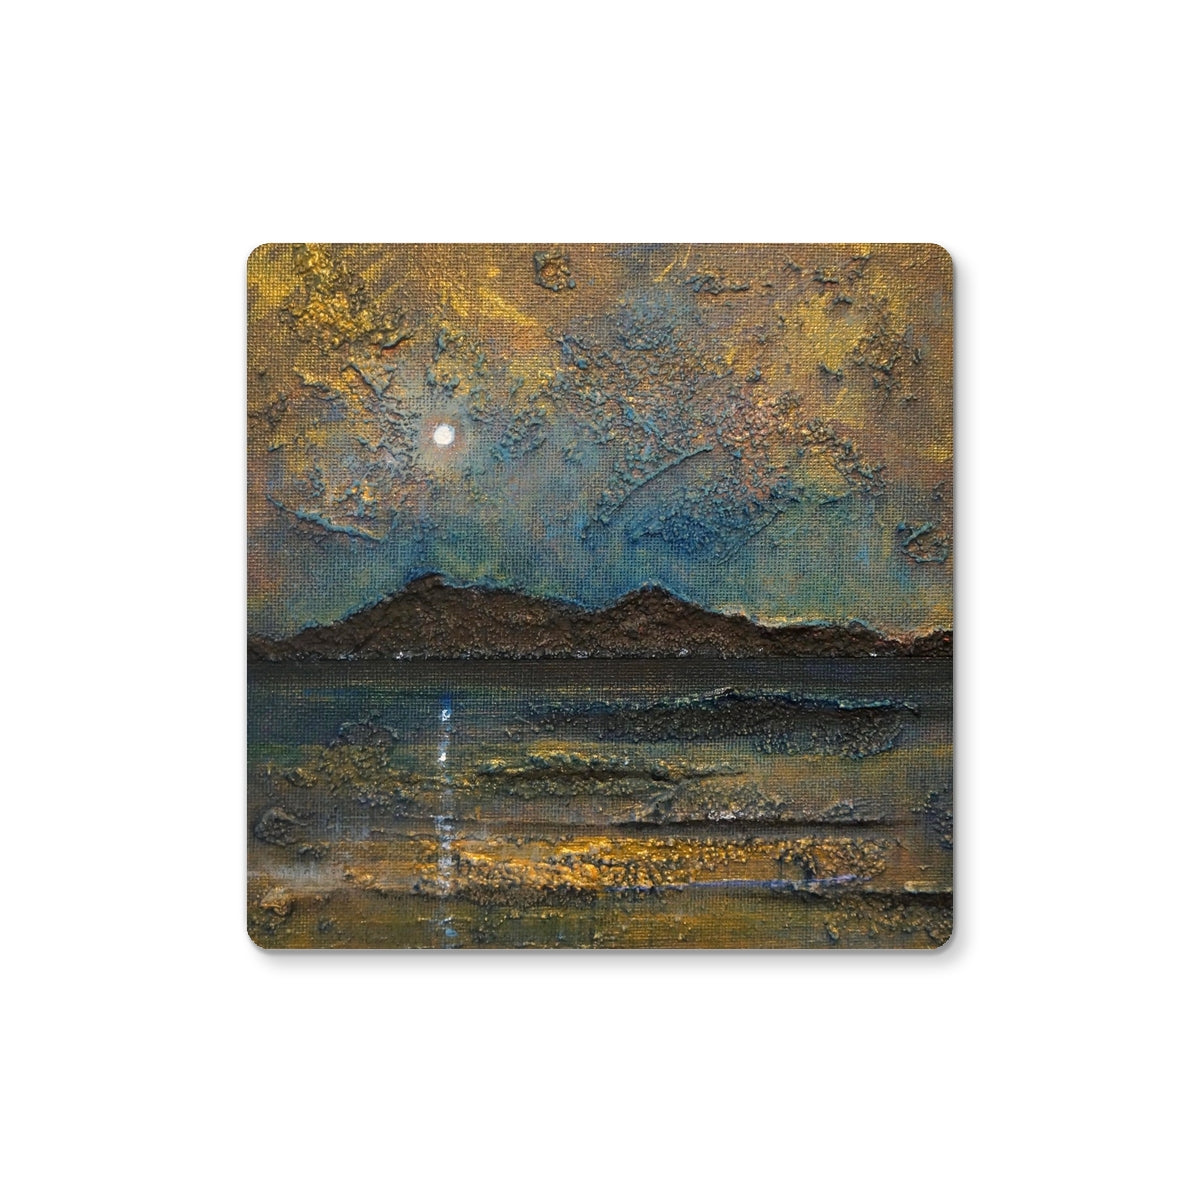 Arran Moonlight Art Gifts Coaster-Coasters-Arran Art Gallery-6 Coasters-Paintings, Prints, Homeware, Art Gifts From Scotland By Scottish Artist Kevin Hunter